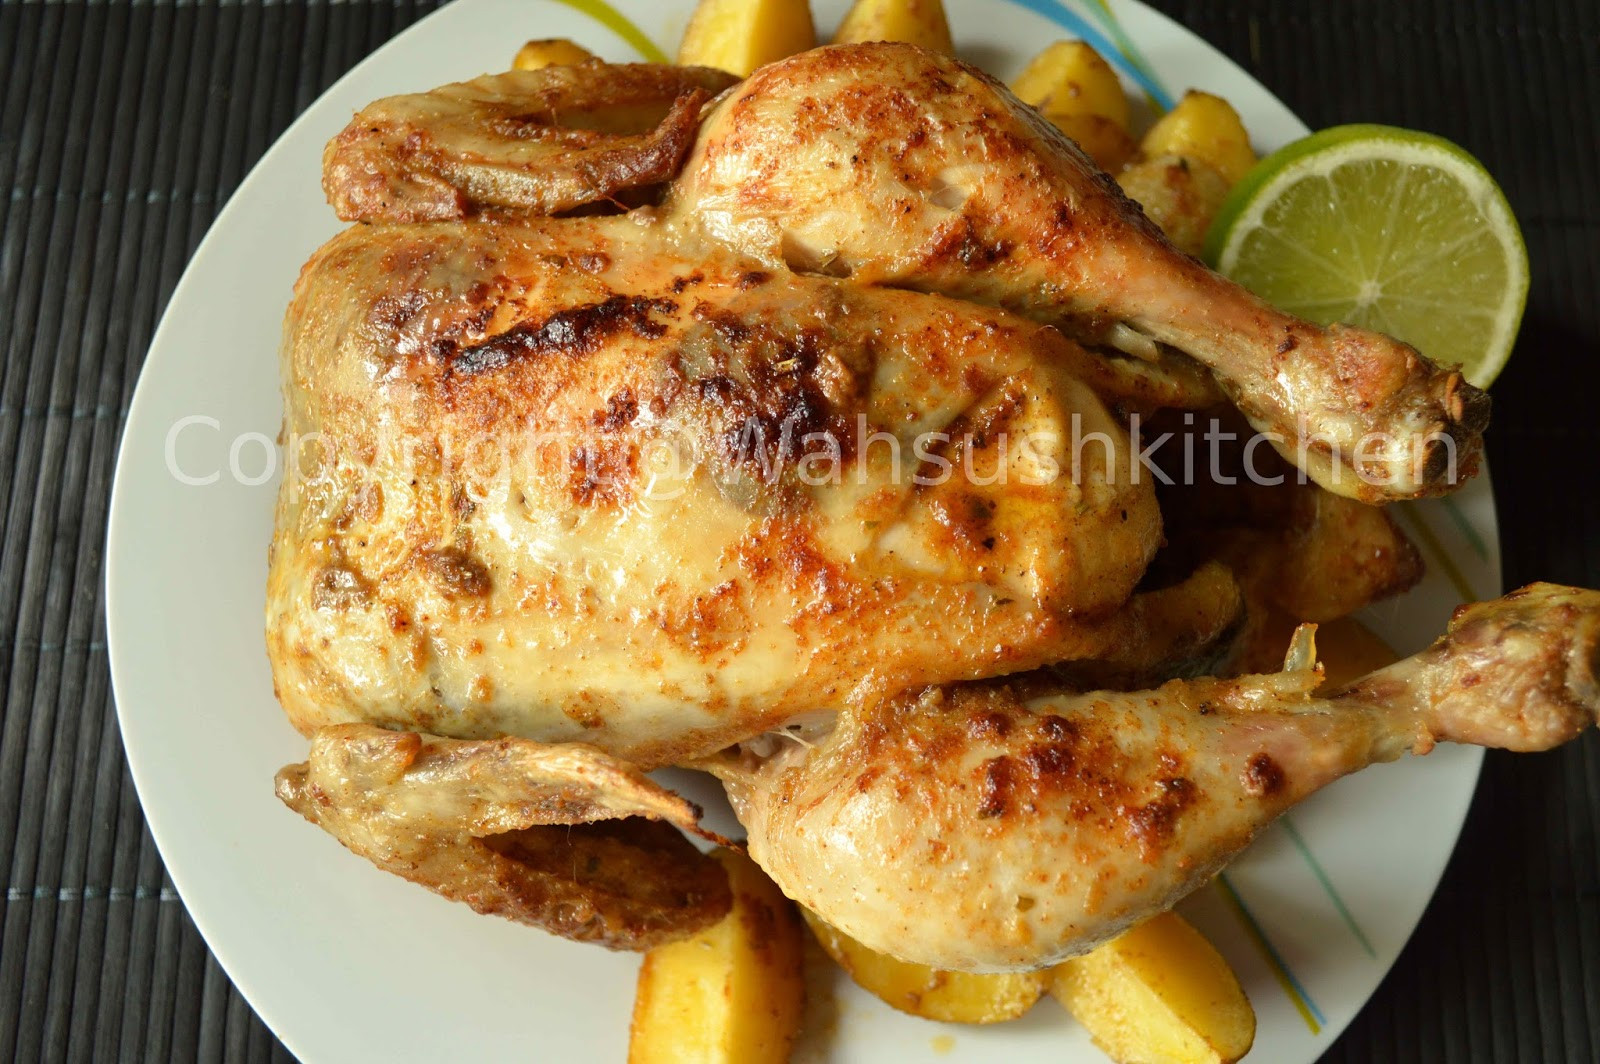 Baking A Whole Chicken
 WahSush Kitchen Baked whole chicken